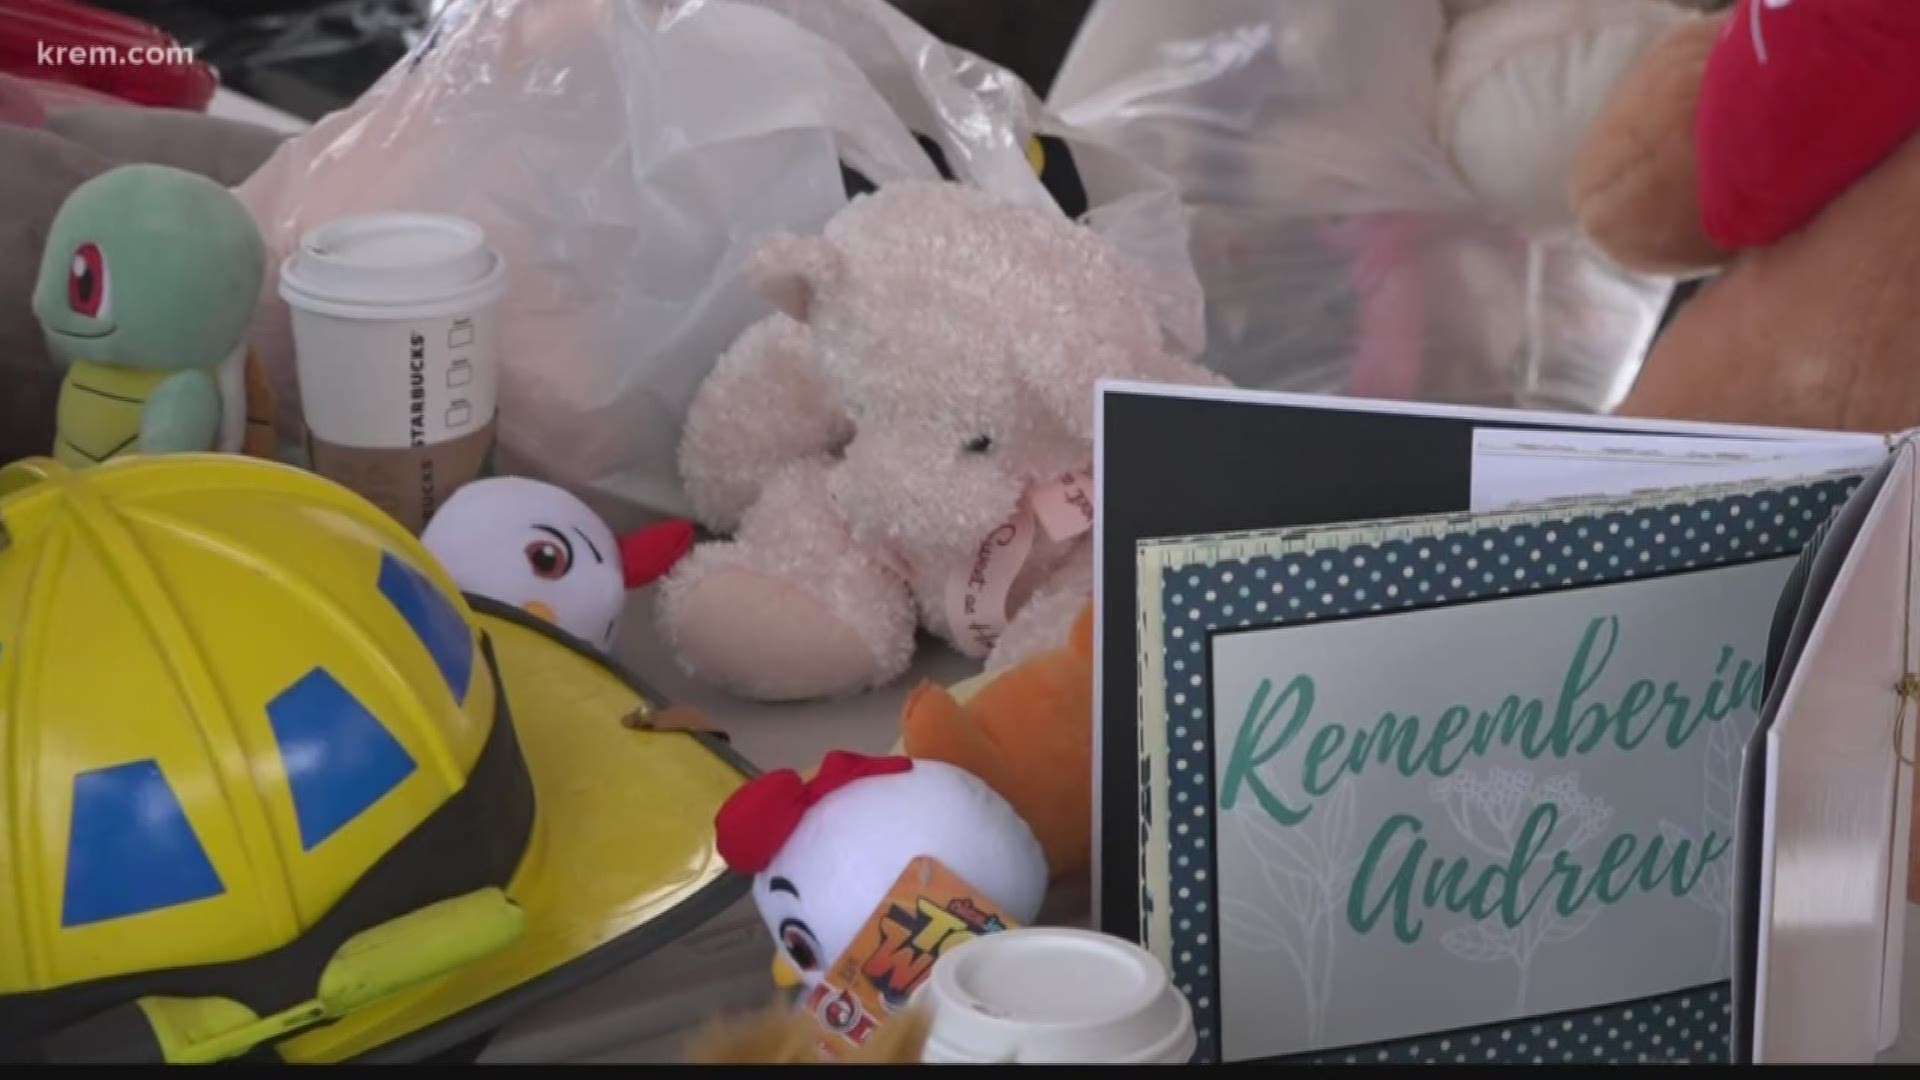 After Andrew Vathis tragically died in a car accident, the South Hill community celebrated his life. Because he loved to bring stuffed animals to the fire department for kids in need, they kept his spirit alive by organizing a stuffed animal drive in his honor.